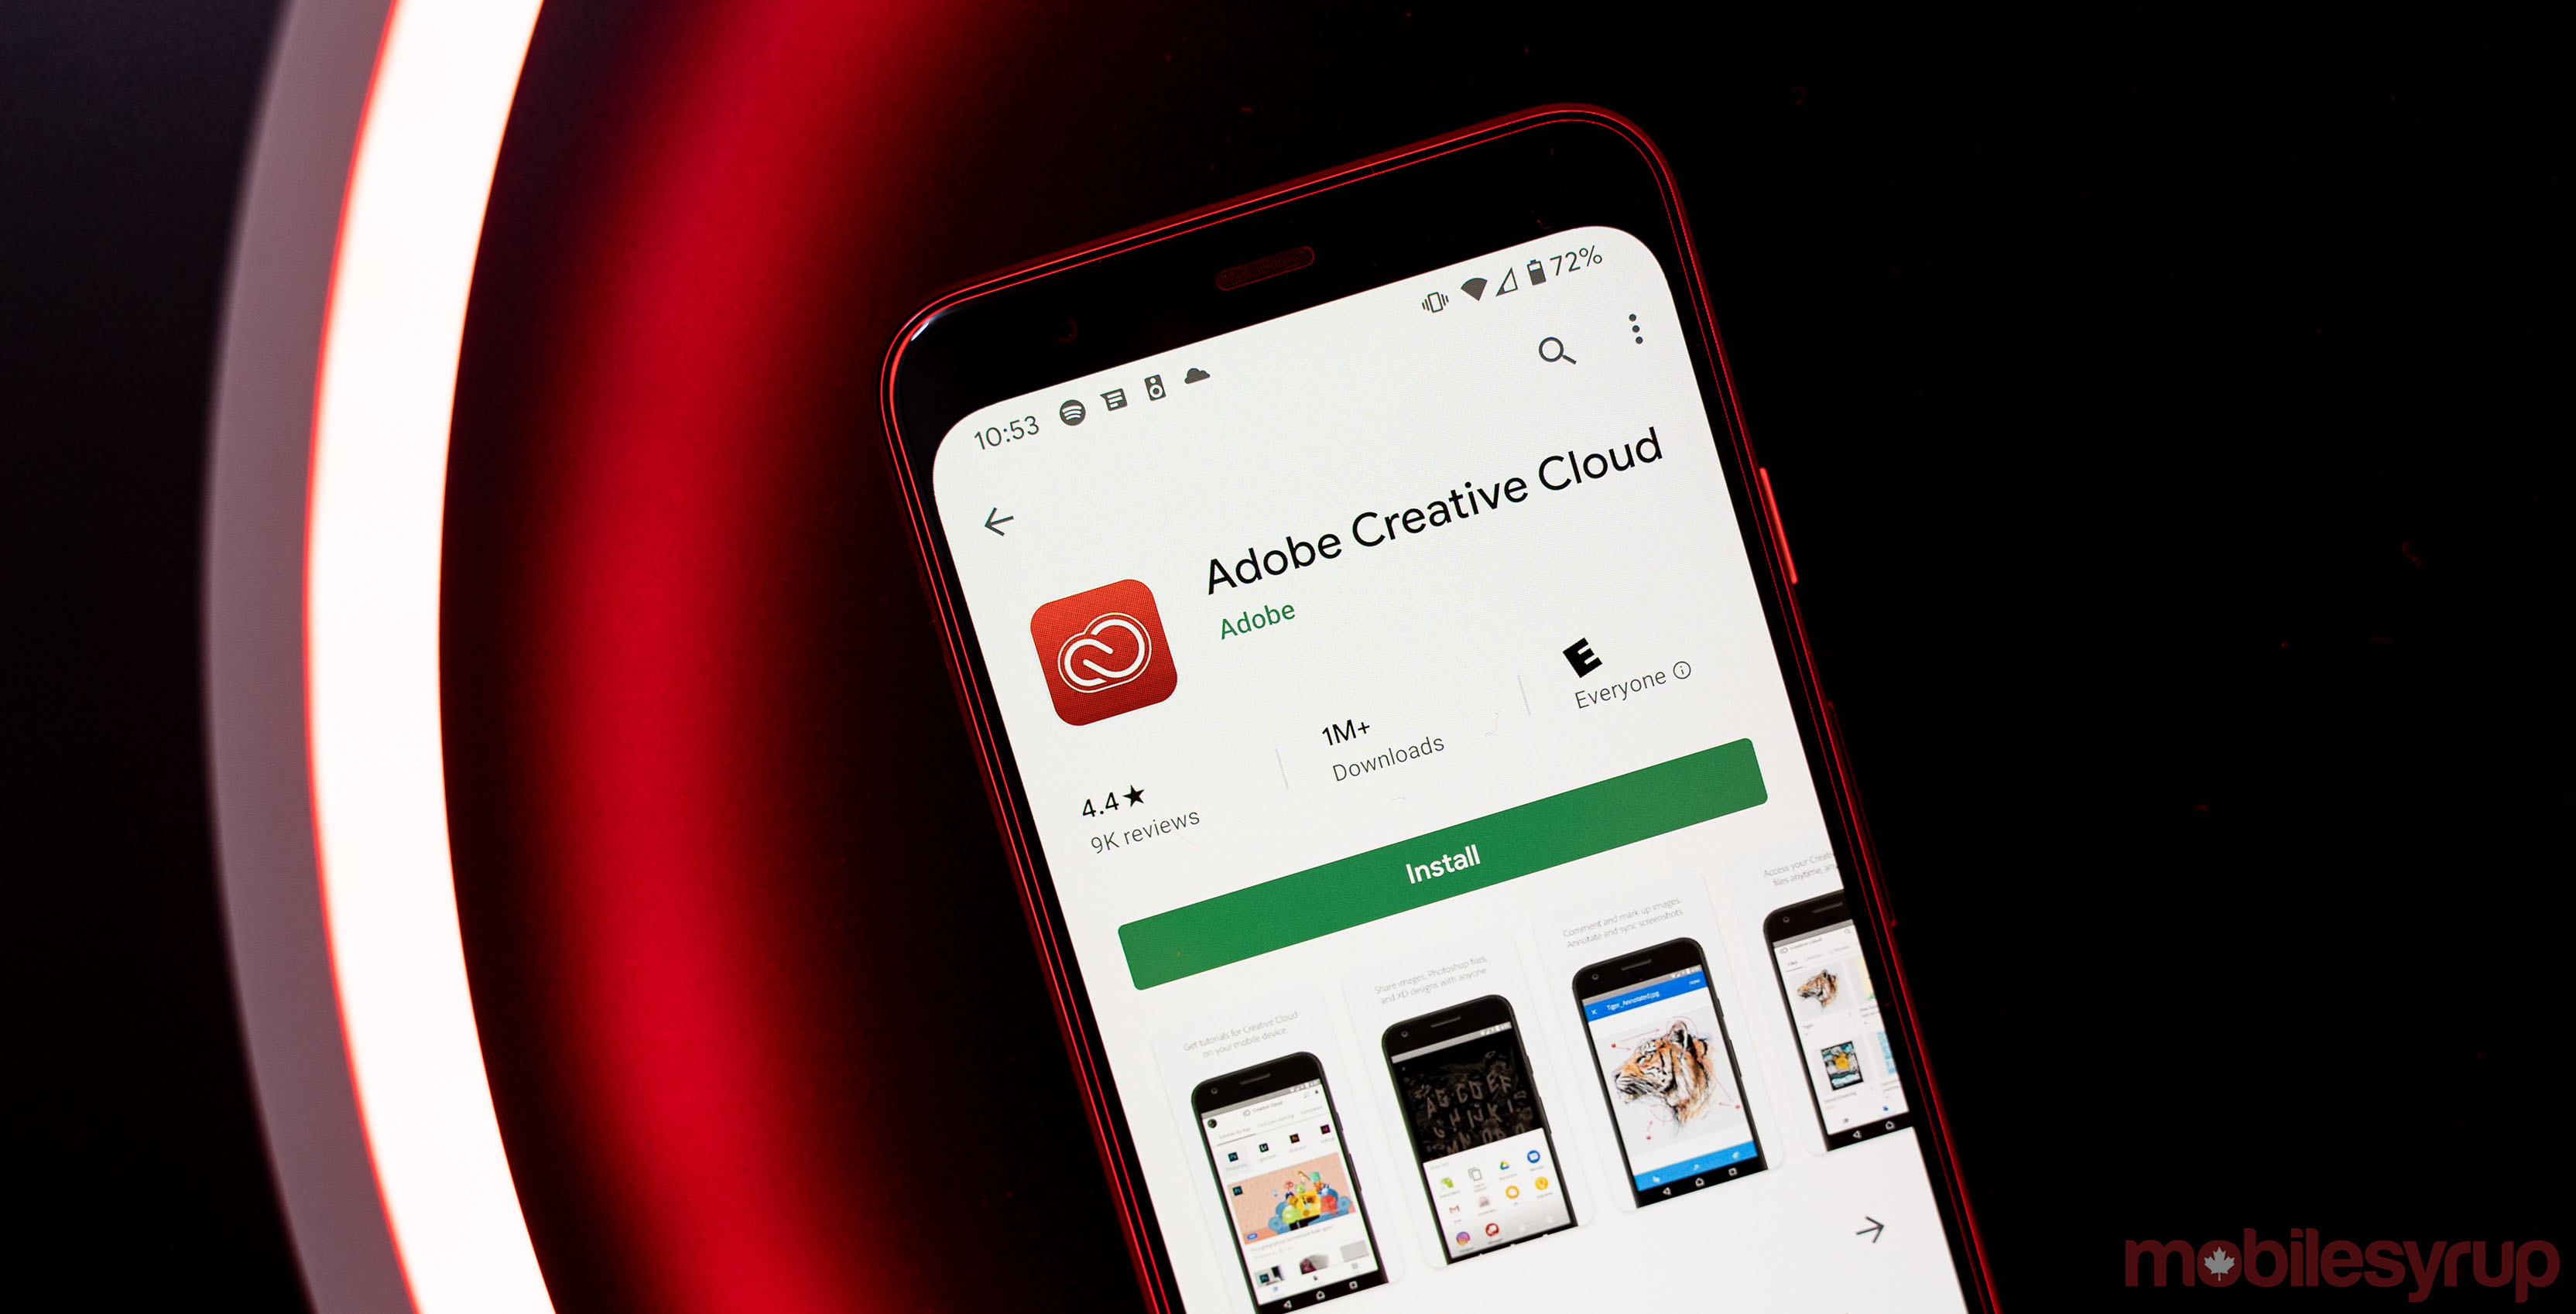 Adobe Creative Cloud app on Android